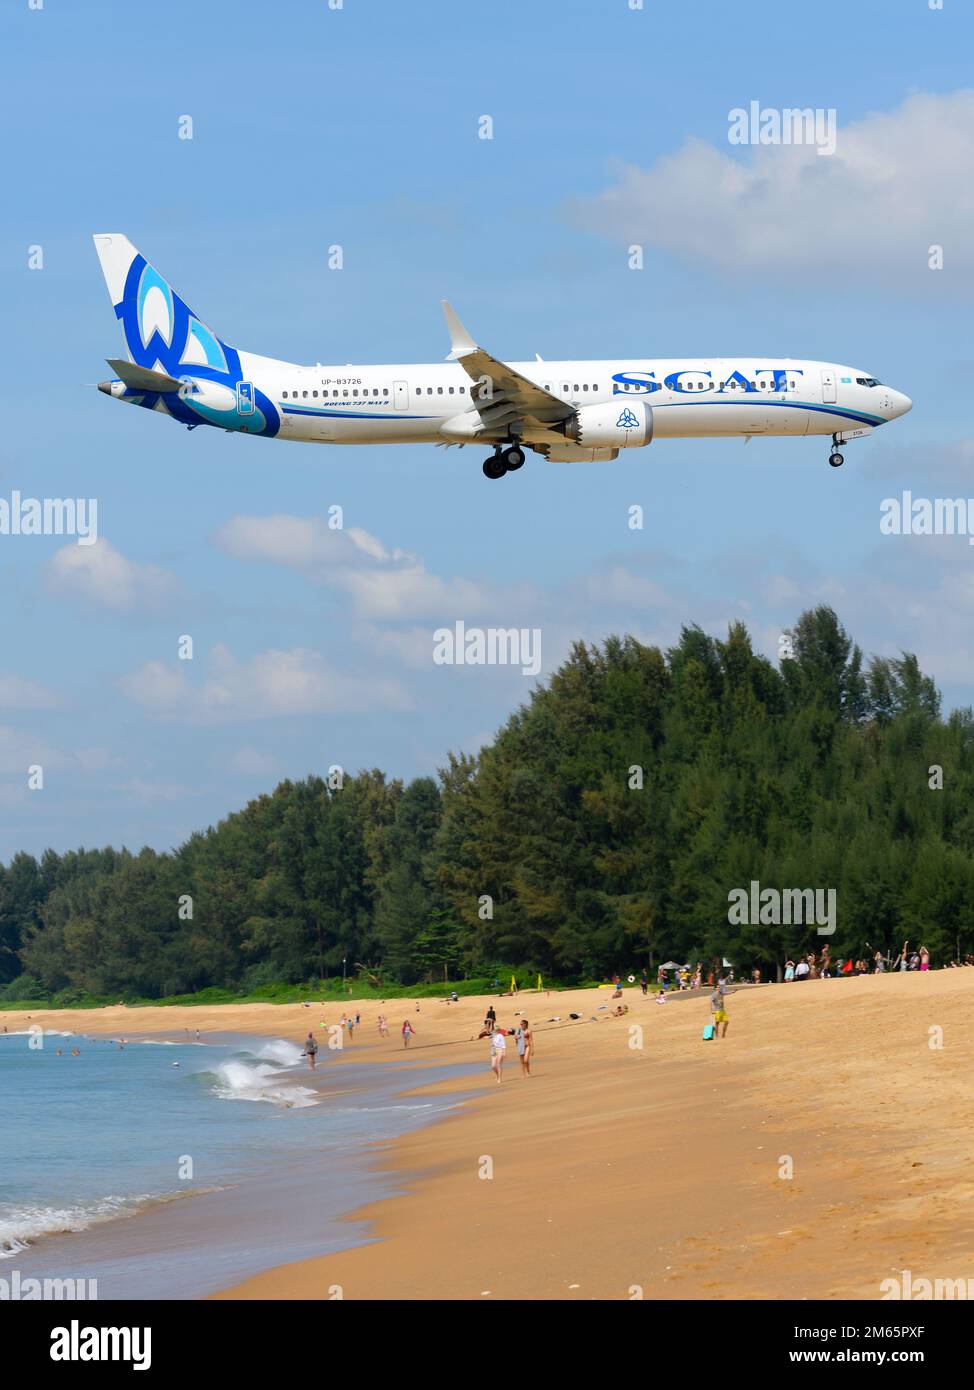 SCAT Airlines Boeing 737-9 MAX airplane flying over beach. Aircraft 737 MAX of Scat Airlines over Mai Khao Beach. Plane 737 MAX UP-B3726. Stock Photo